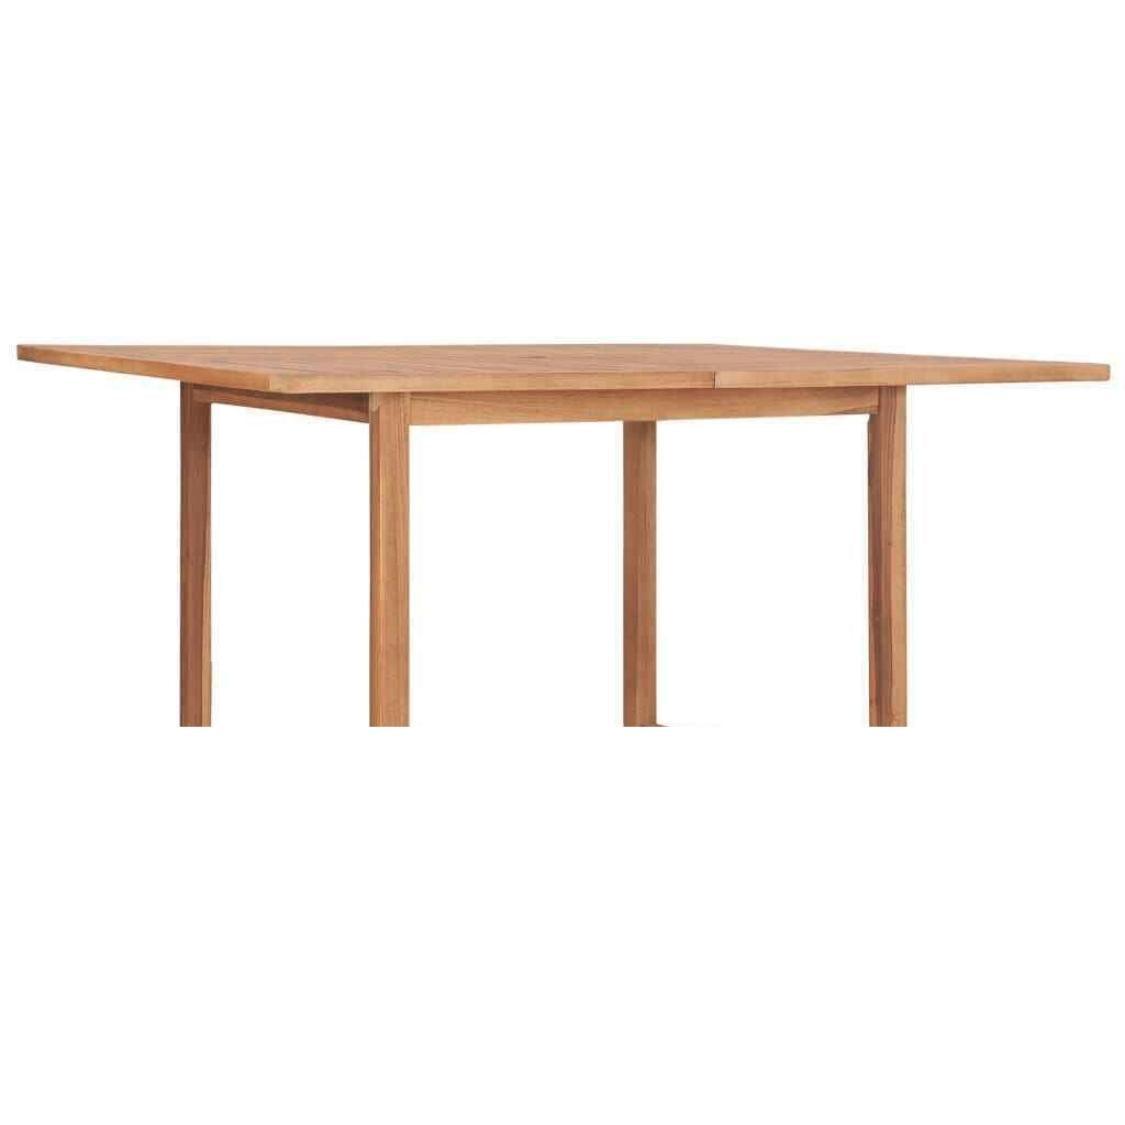 LOOMLAN Outdoor - Hamilton Square Teak Outdoor Dining Table with Umbrella Hole - Outdoor Dining Tables